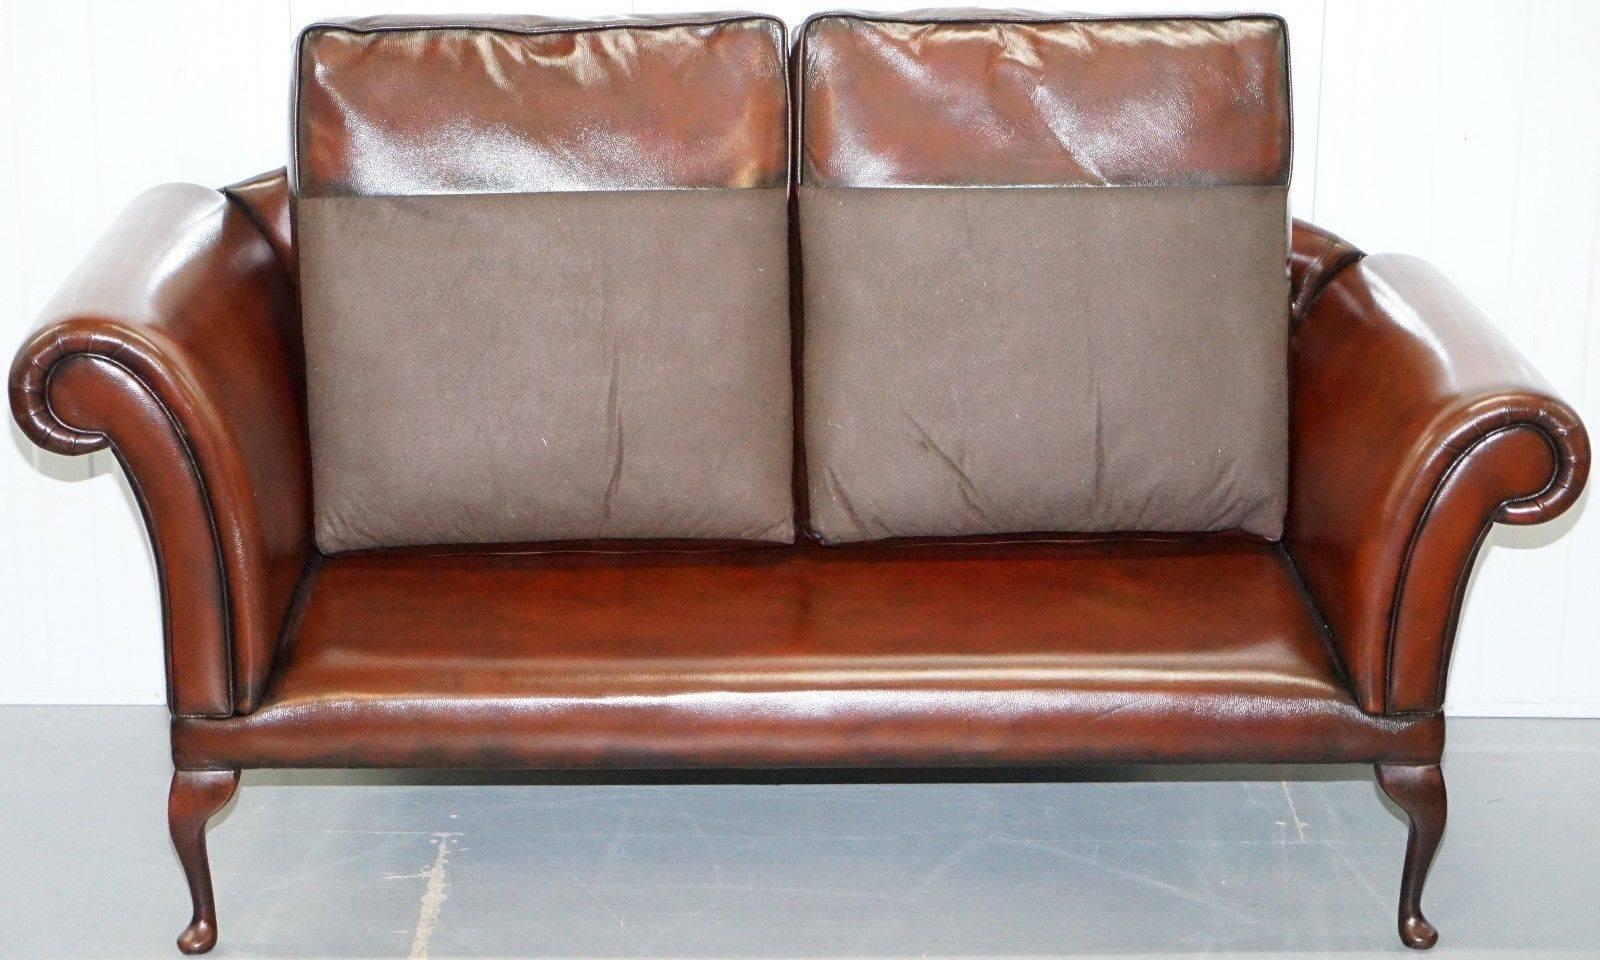 We are delighted to offer for sale this stunning fully restored deep cigar brown leather Chesterfield buttoned chaise longue sofa with thick deep feather filled cushions

An exceptional quality and well-made piece, the leather finish is very dark